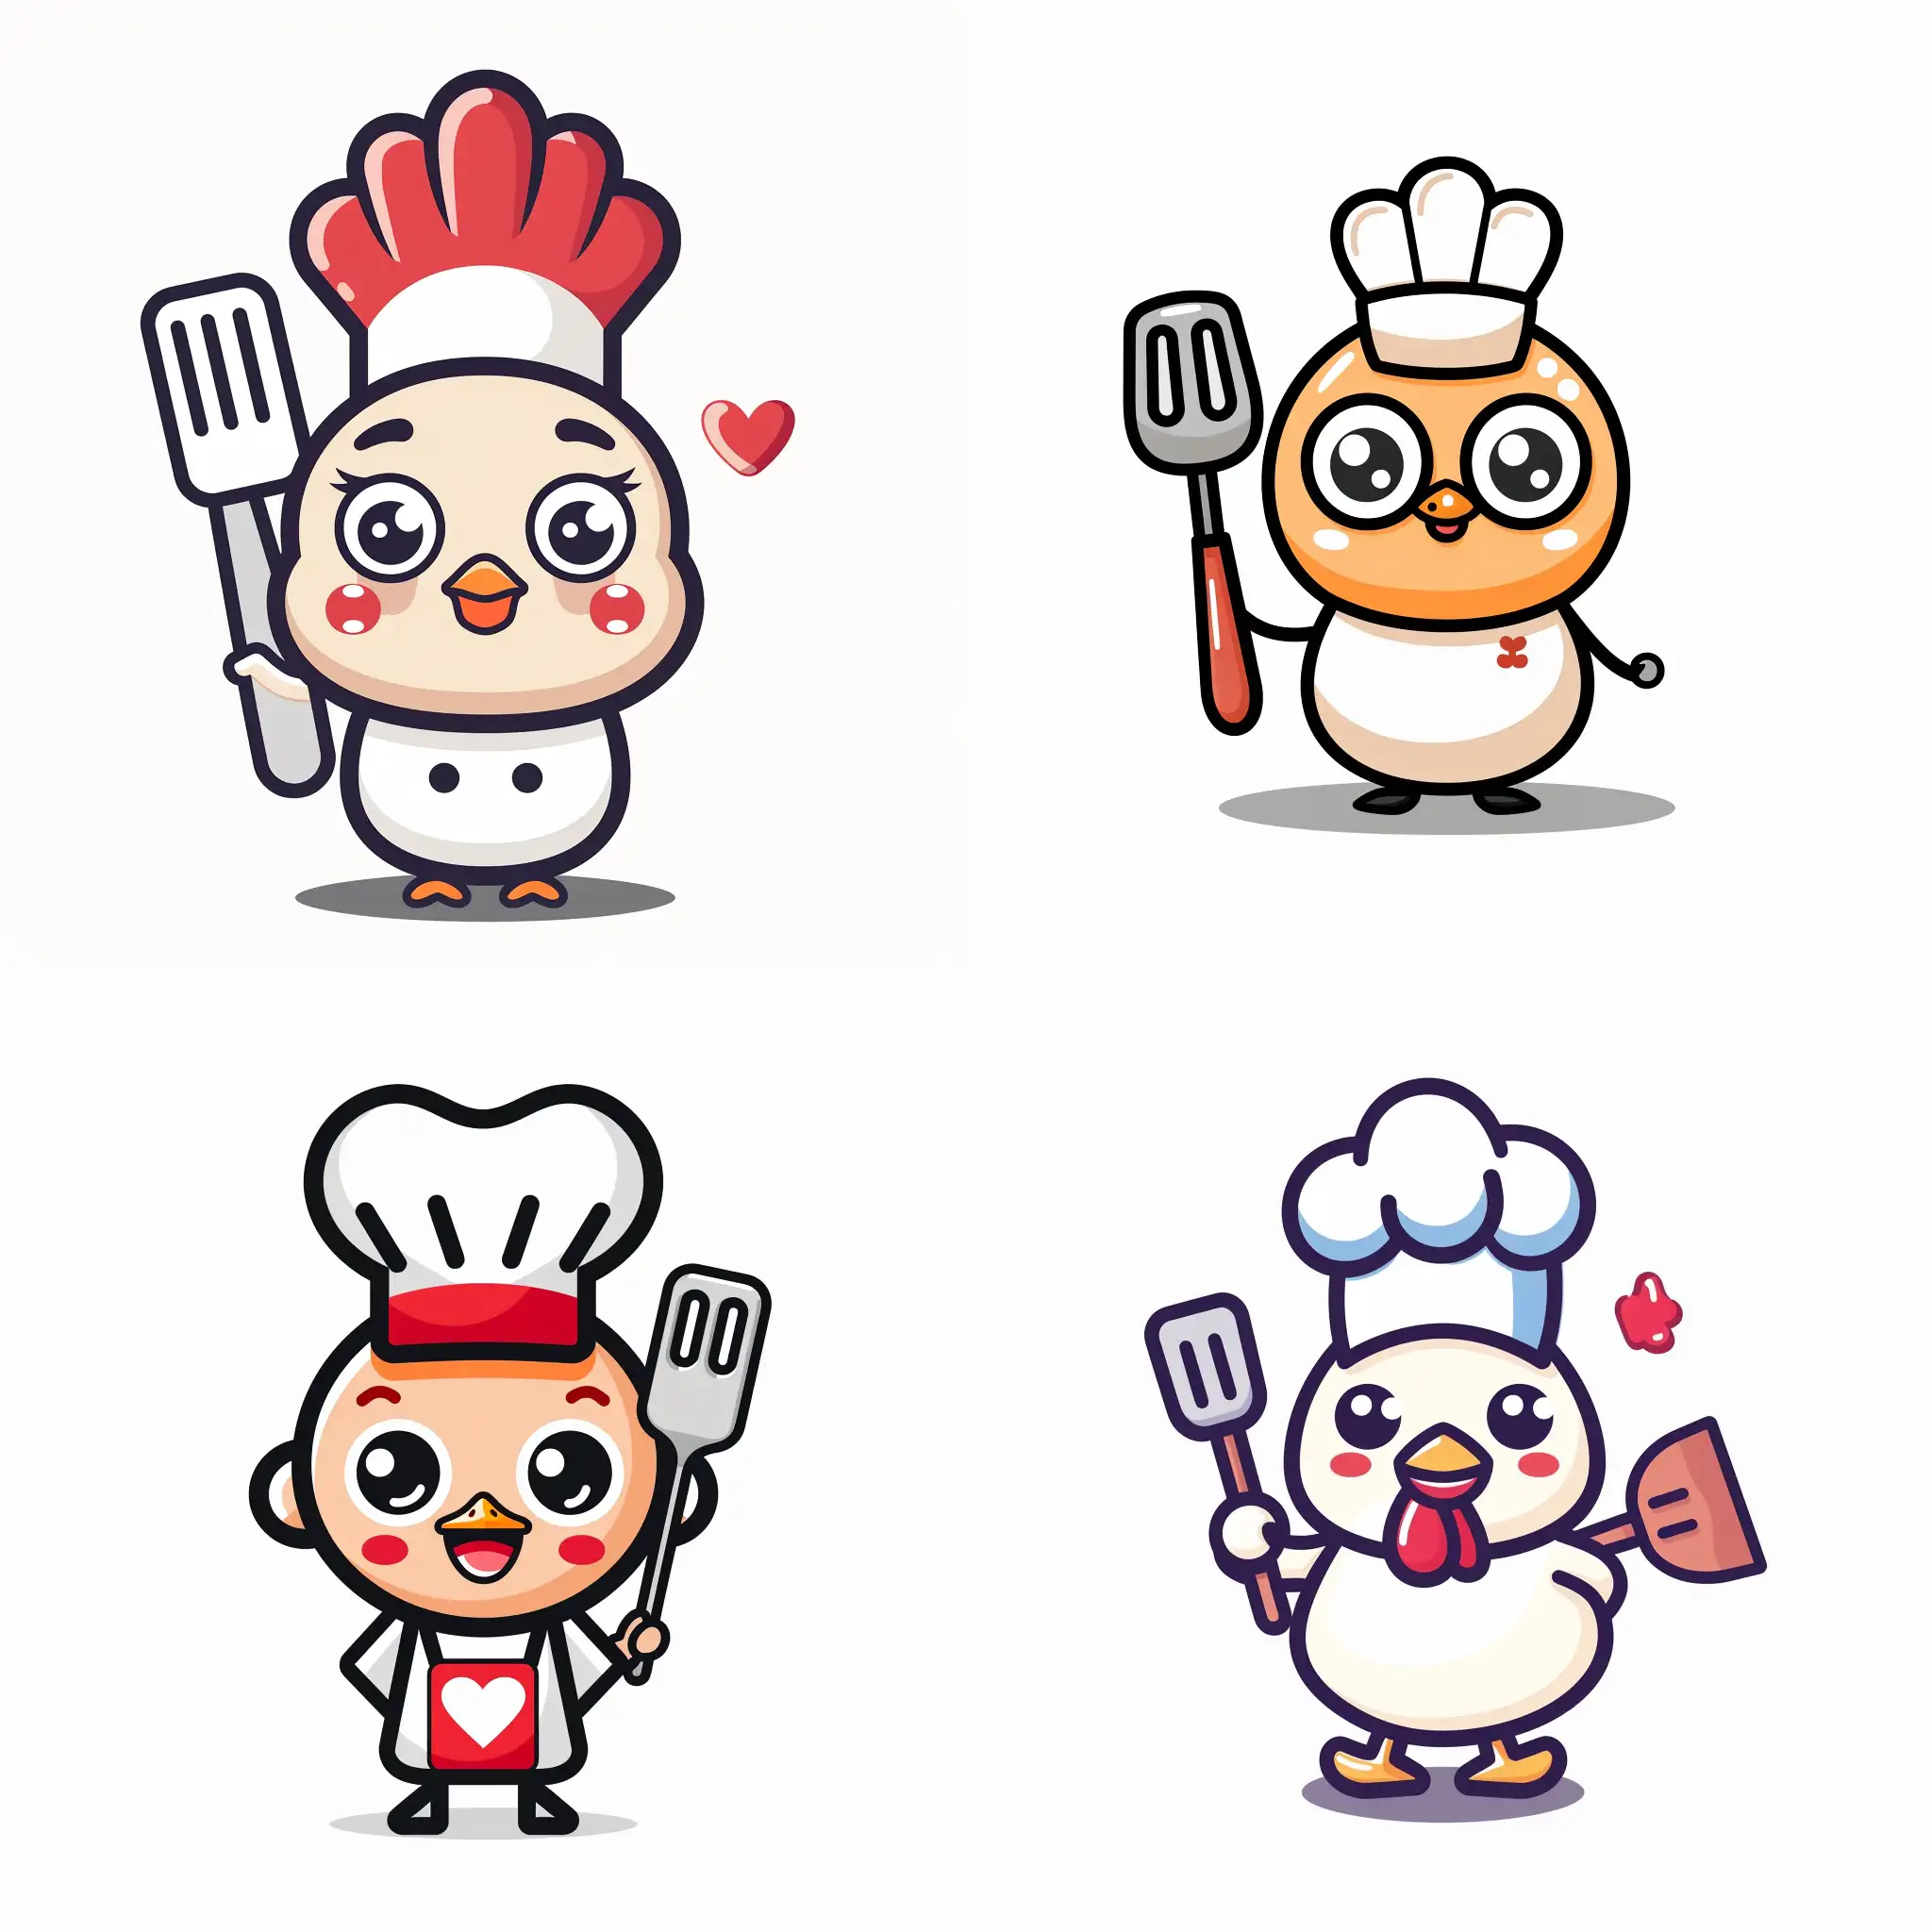 Cheerful-Cartoon-Cuisine-Chef-with-Big-Eyes-and-Spatula-in-Hand